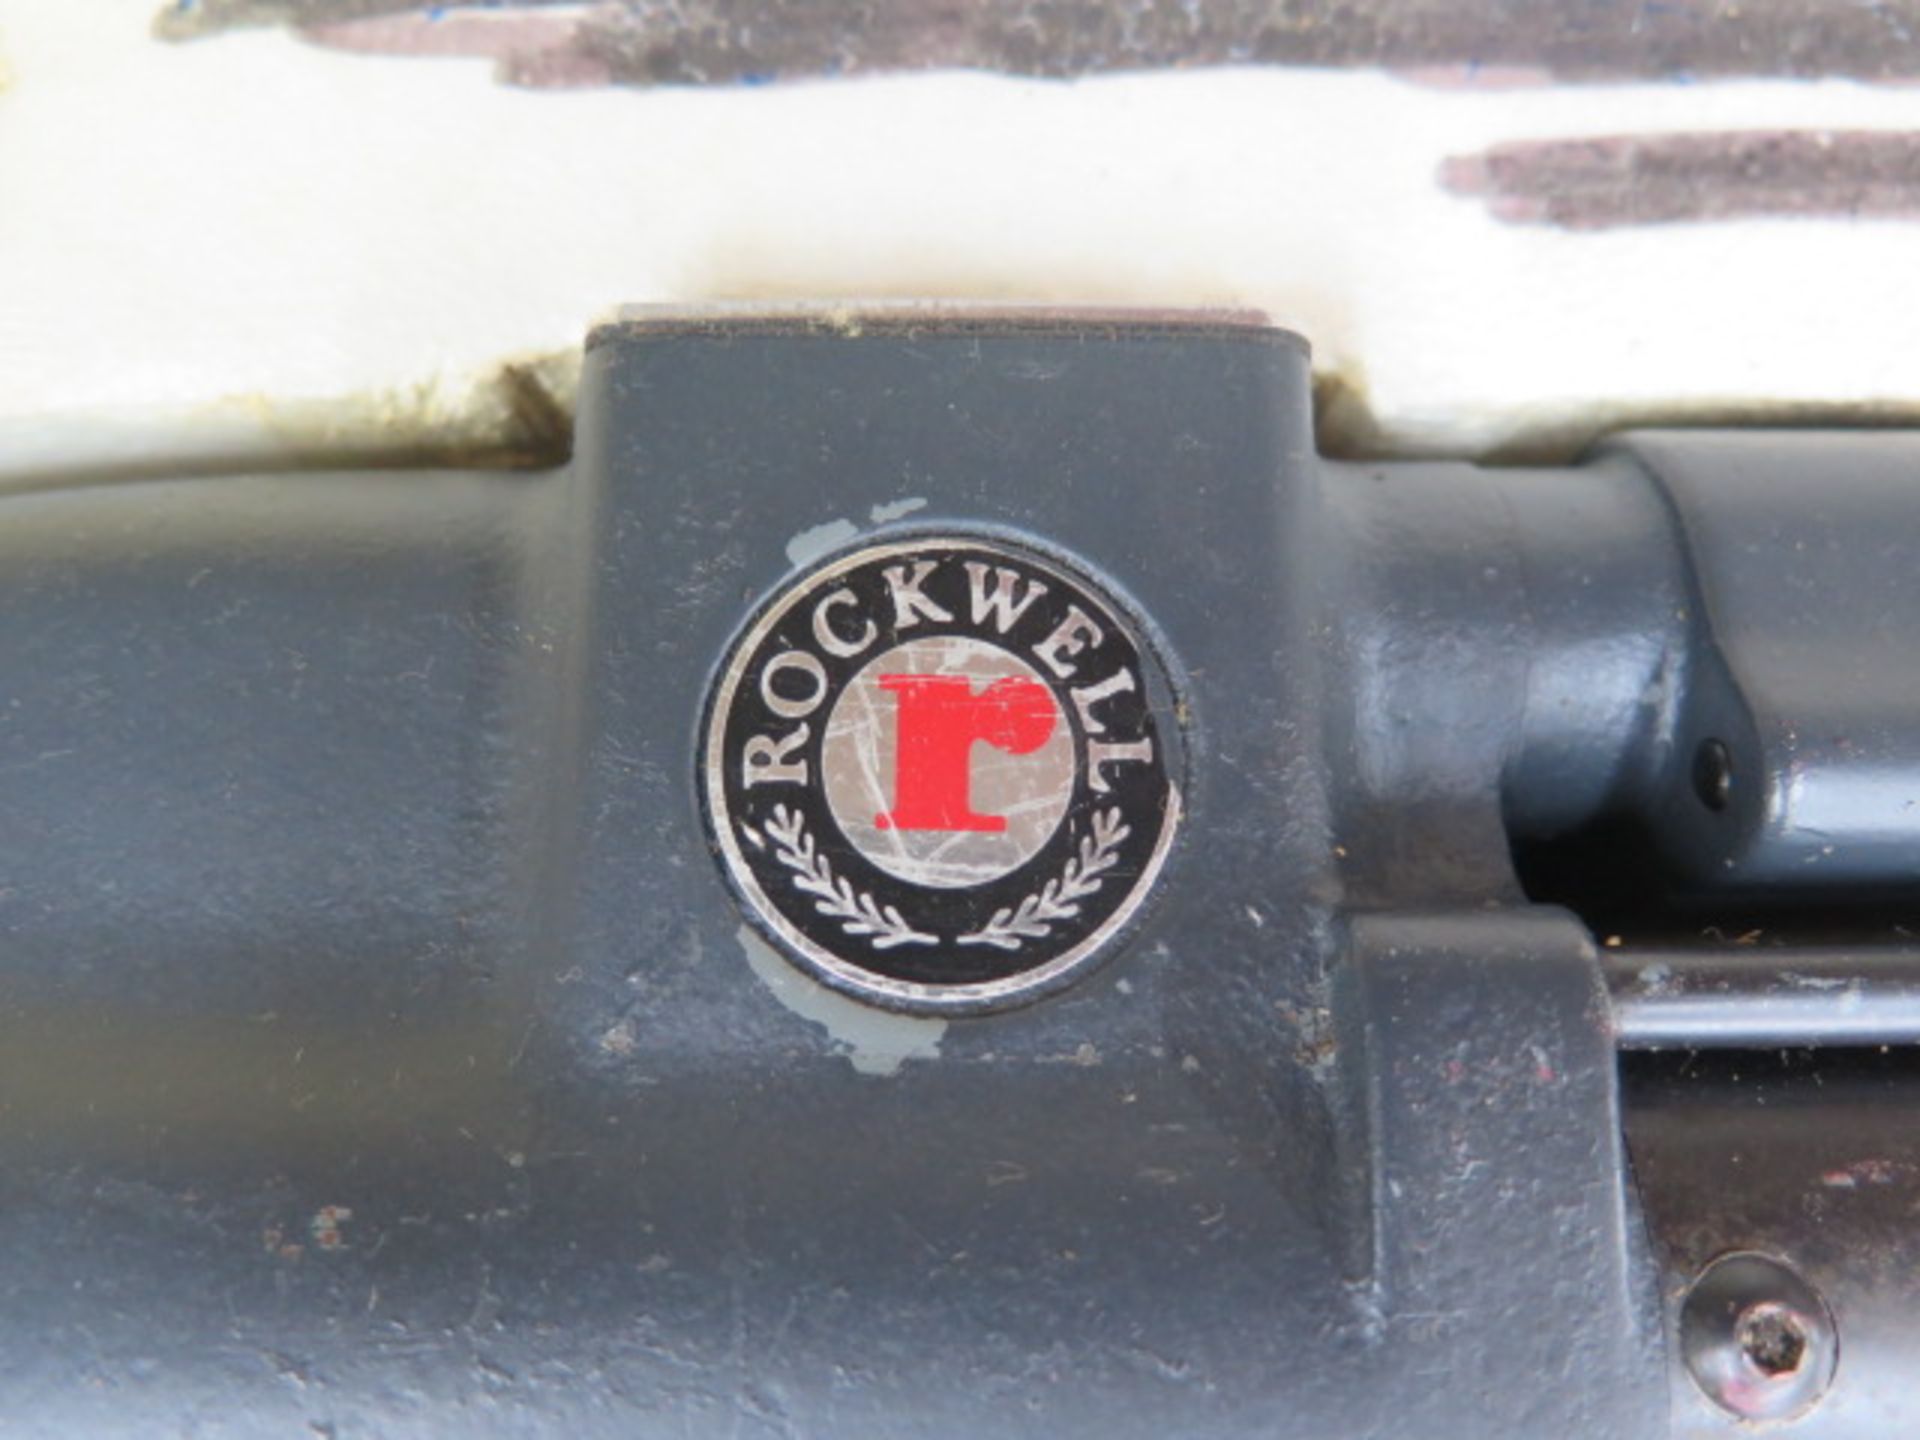 Rockwell Pneumatic Drill Head - Image 5 of 5